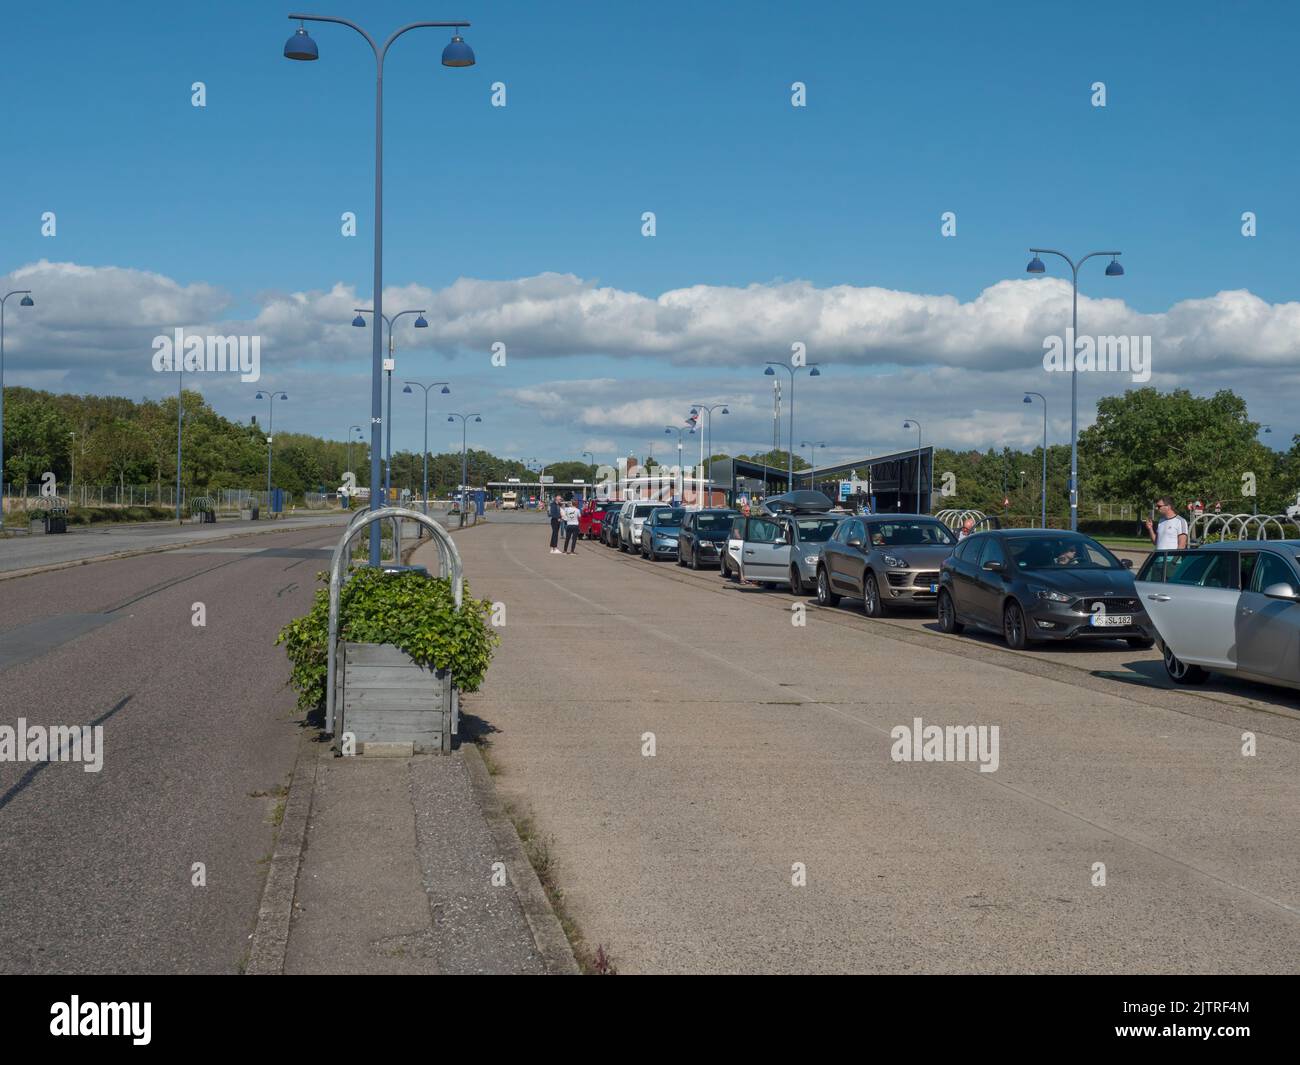 Rodbyhavn, Denmark, Agust 21, 2021: Queue of cars waiting to boad on Scandlines Hybrid Ferry boat on sea route Rodby - Puttgarden, between Denmark and Stock Photo